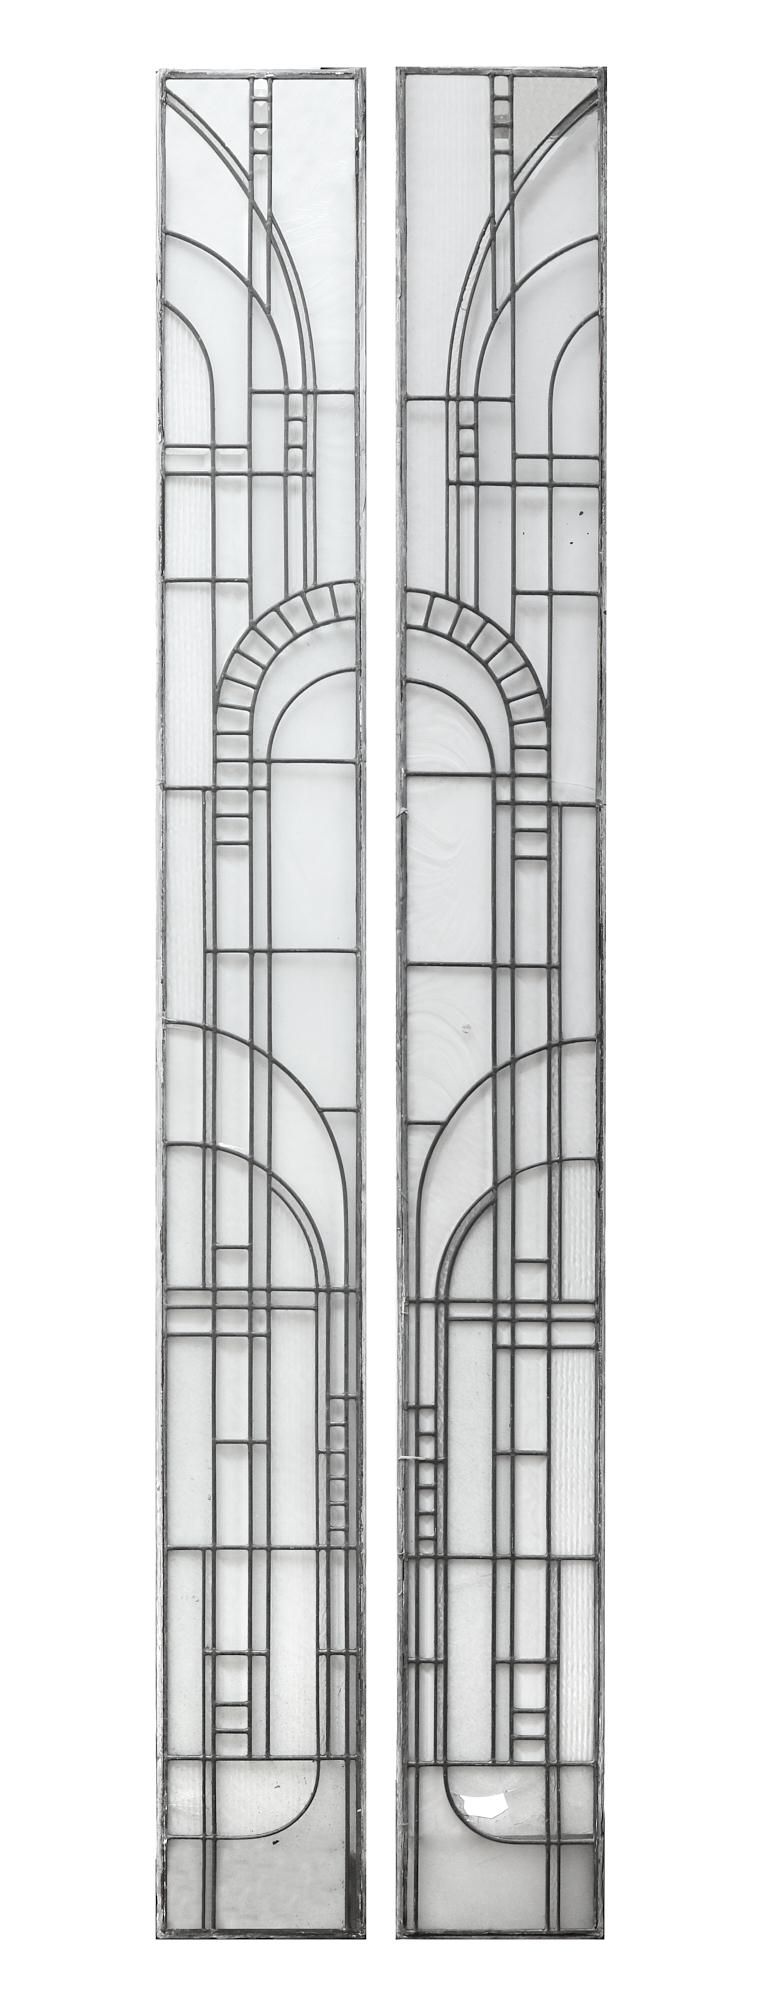 A PAIR OF TALL ART DECO LEADED